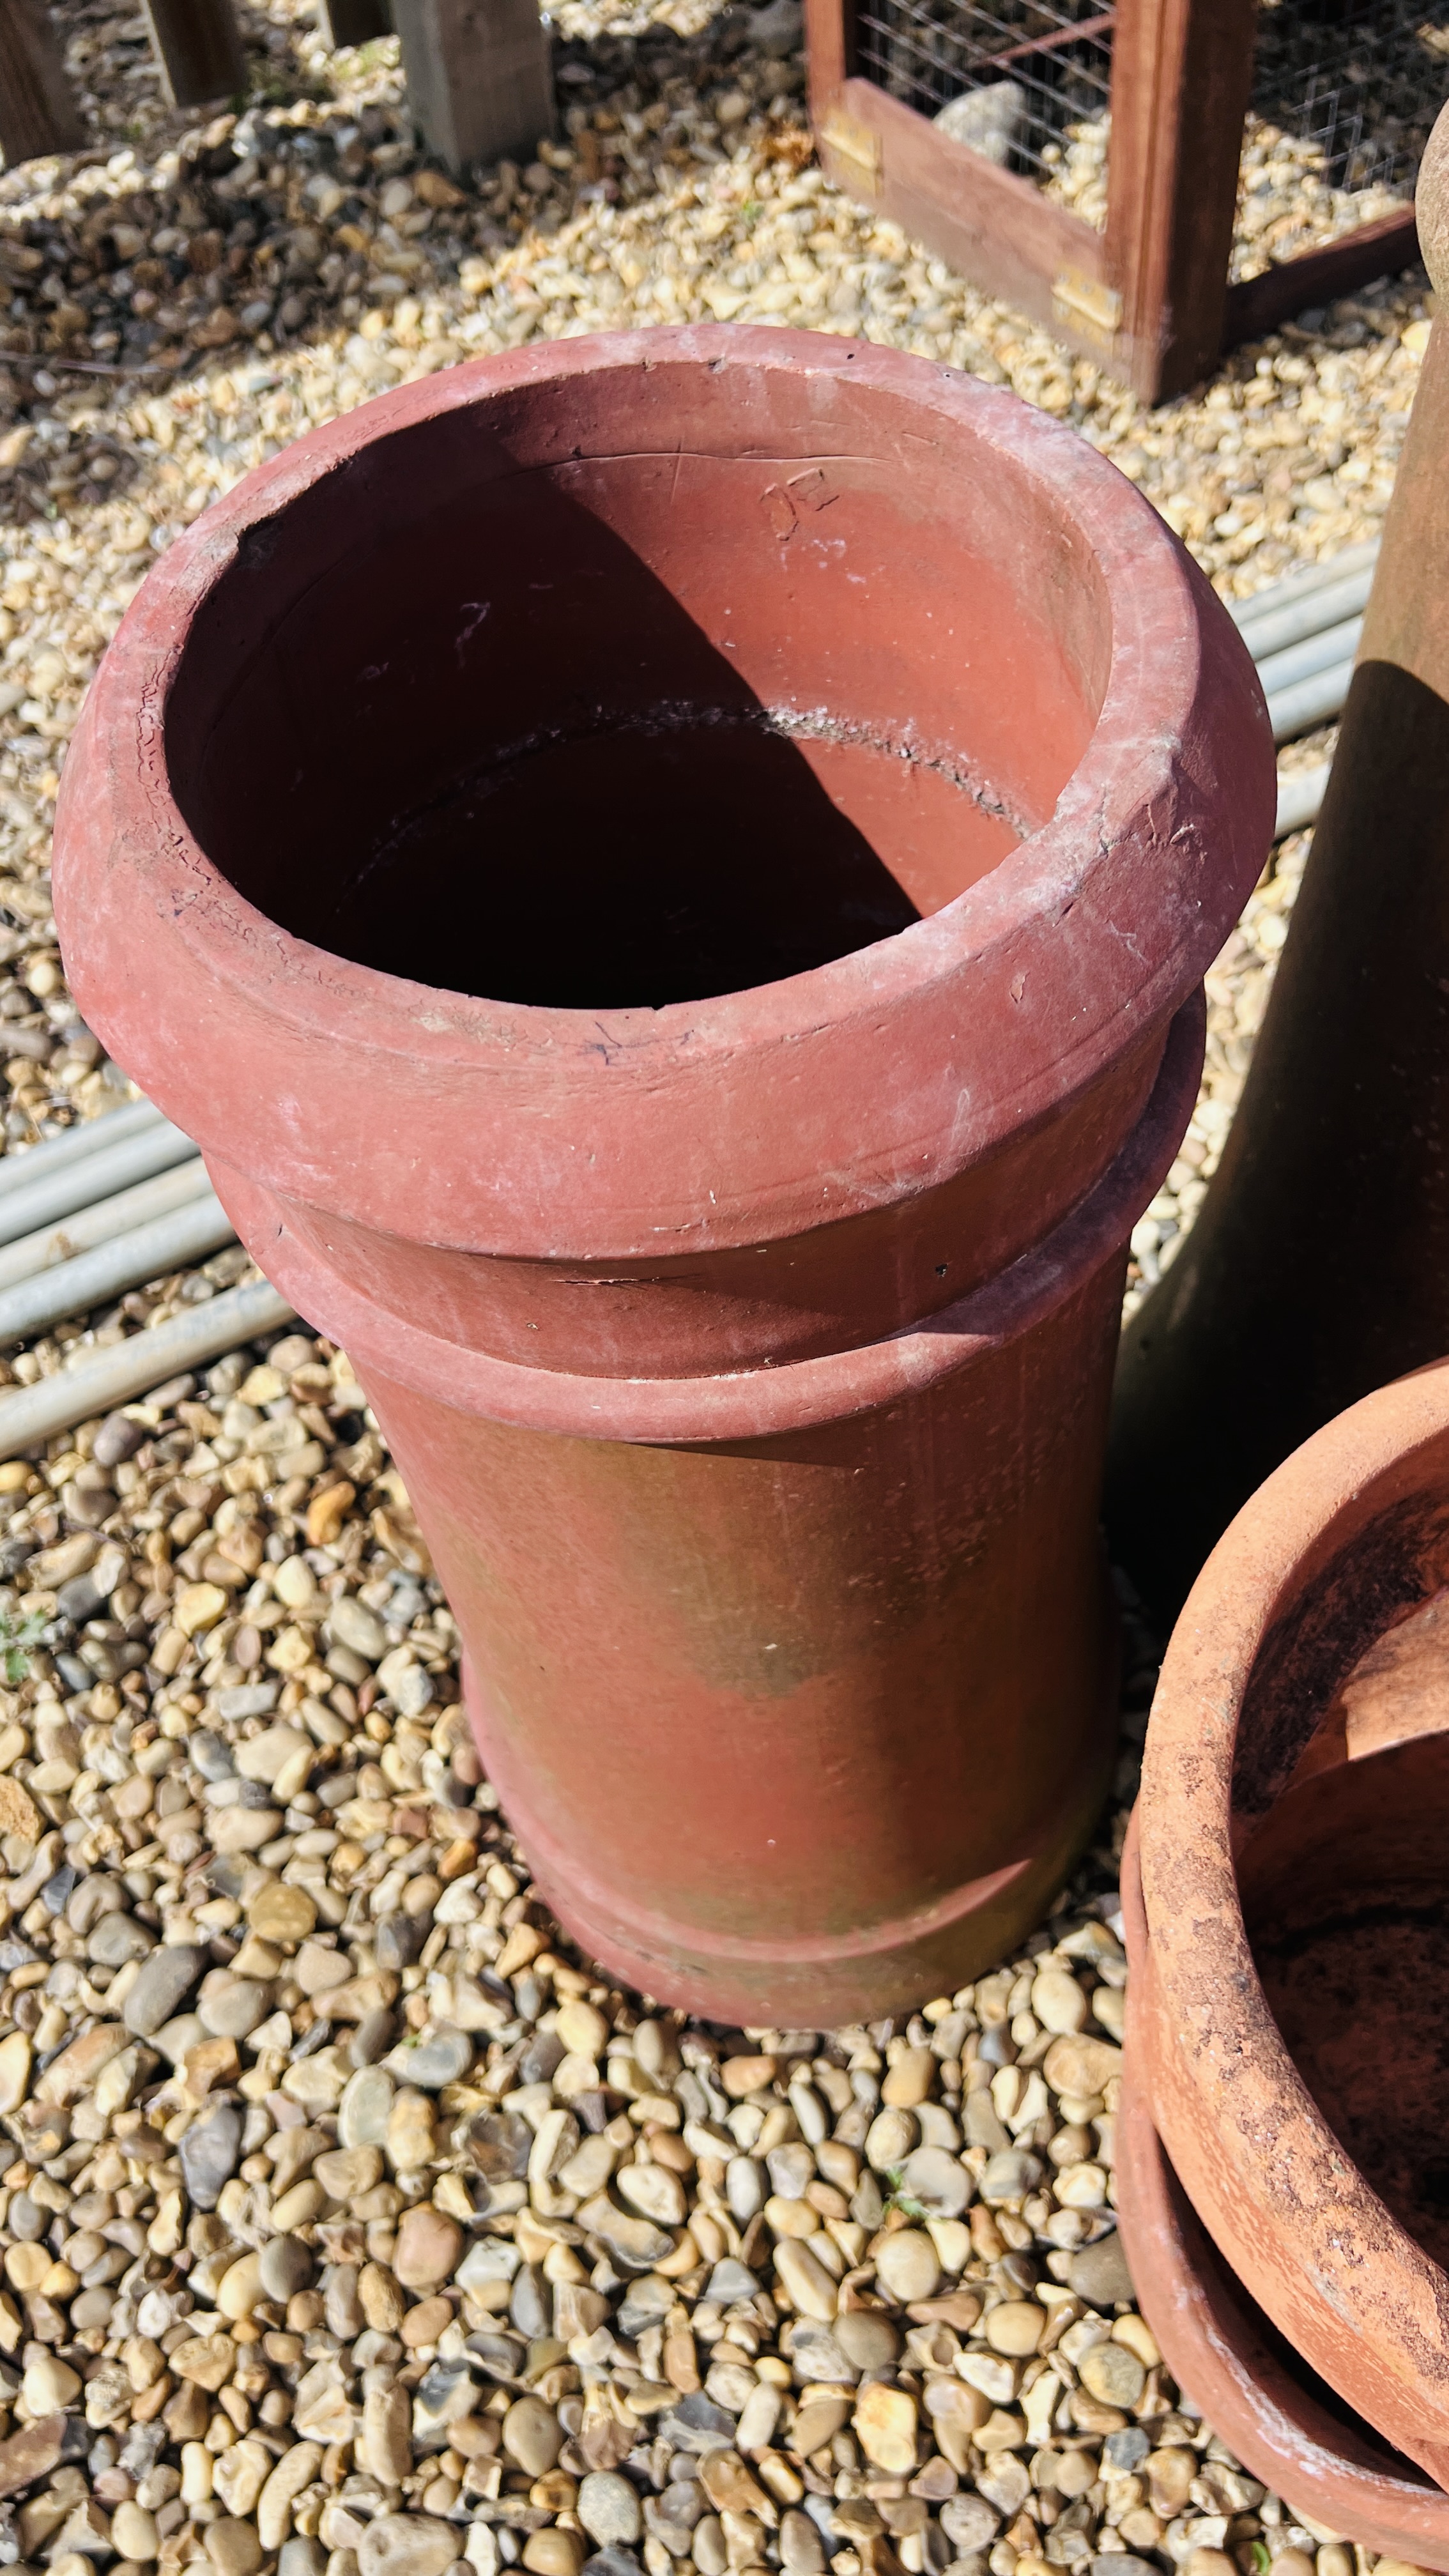 TWO TERRACOTTA CHIMNEY POTS ALONG WITH A TERRACOTTA PLANT POT - Image 4 of 4